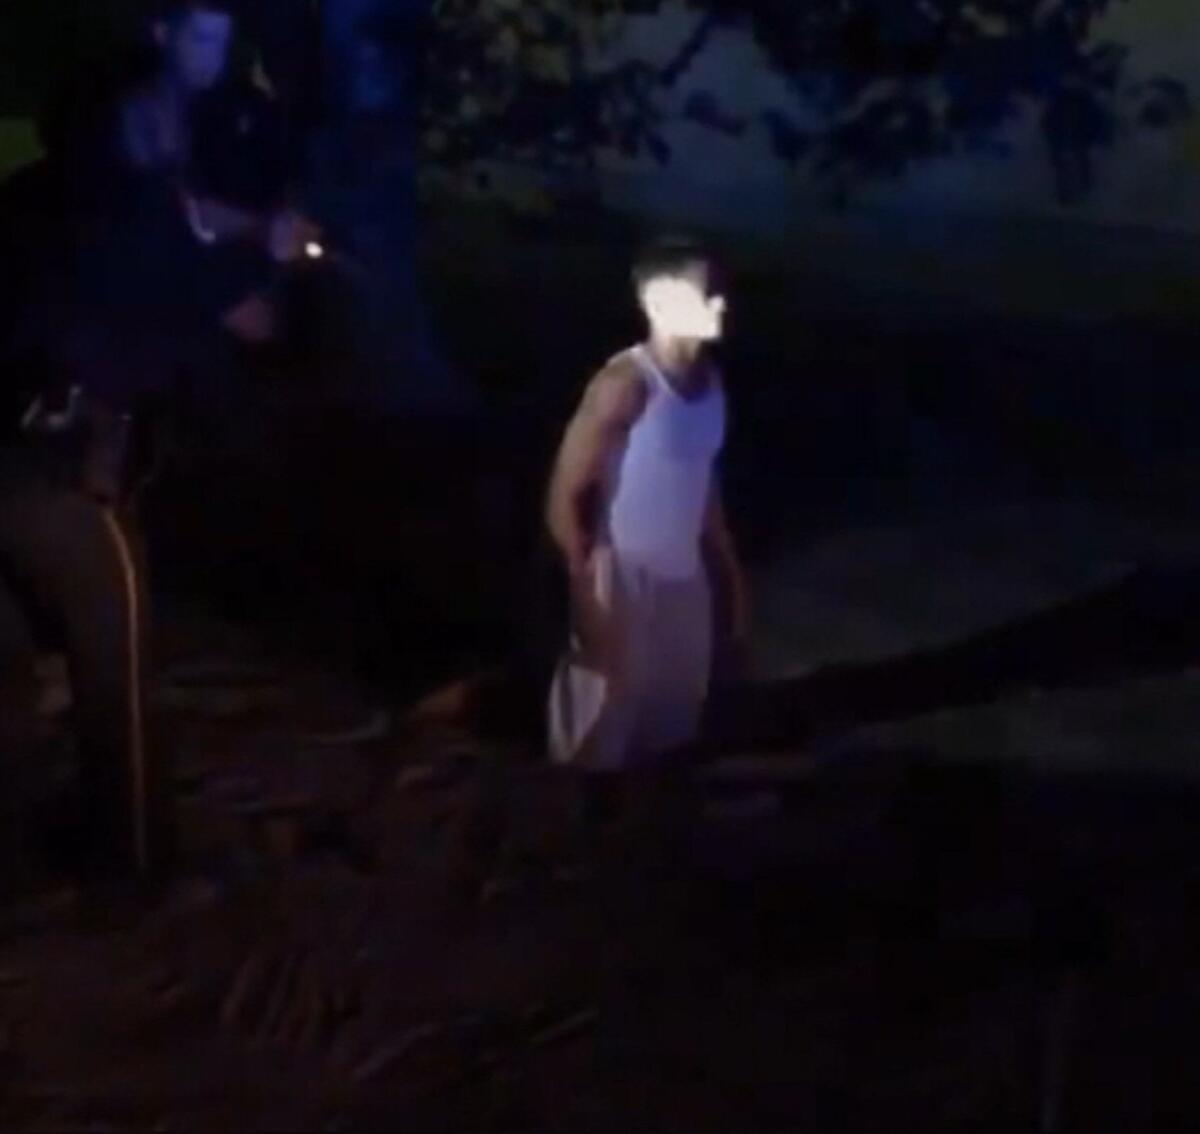 This image from a video provided by Brandon Woodson and taken Oct. 8 shows a police encounter with Prairie View, Texas, City Councilman Jonathan Miller.